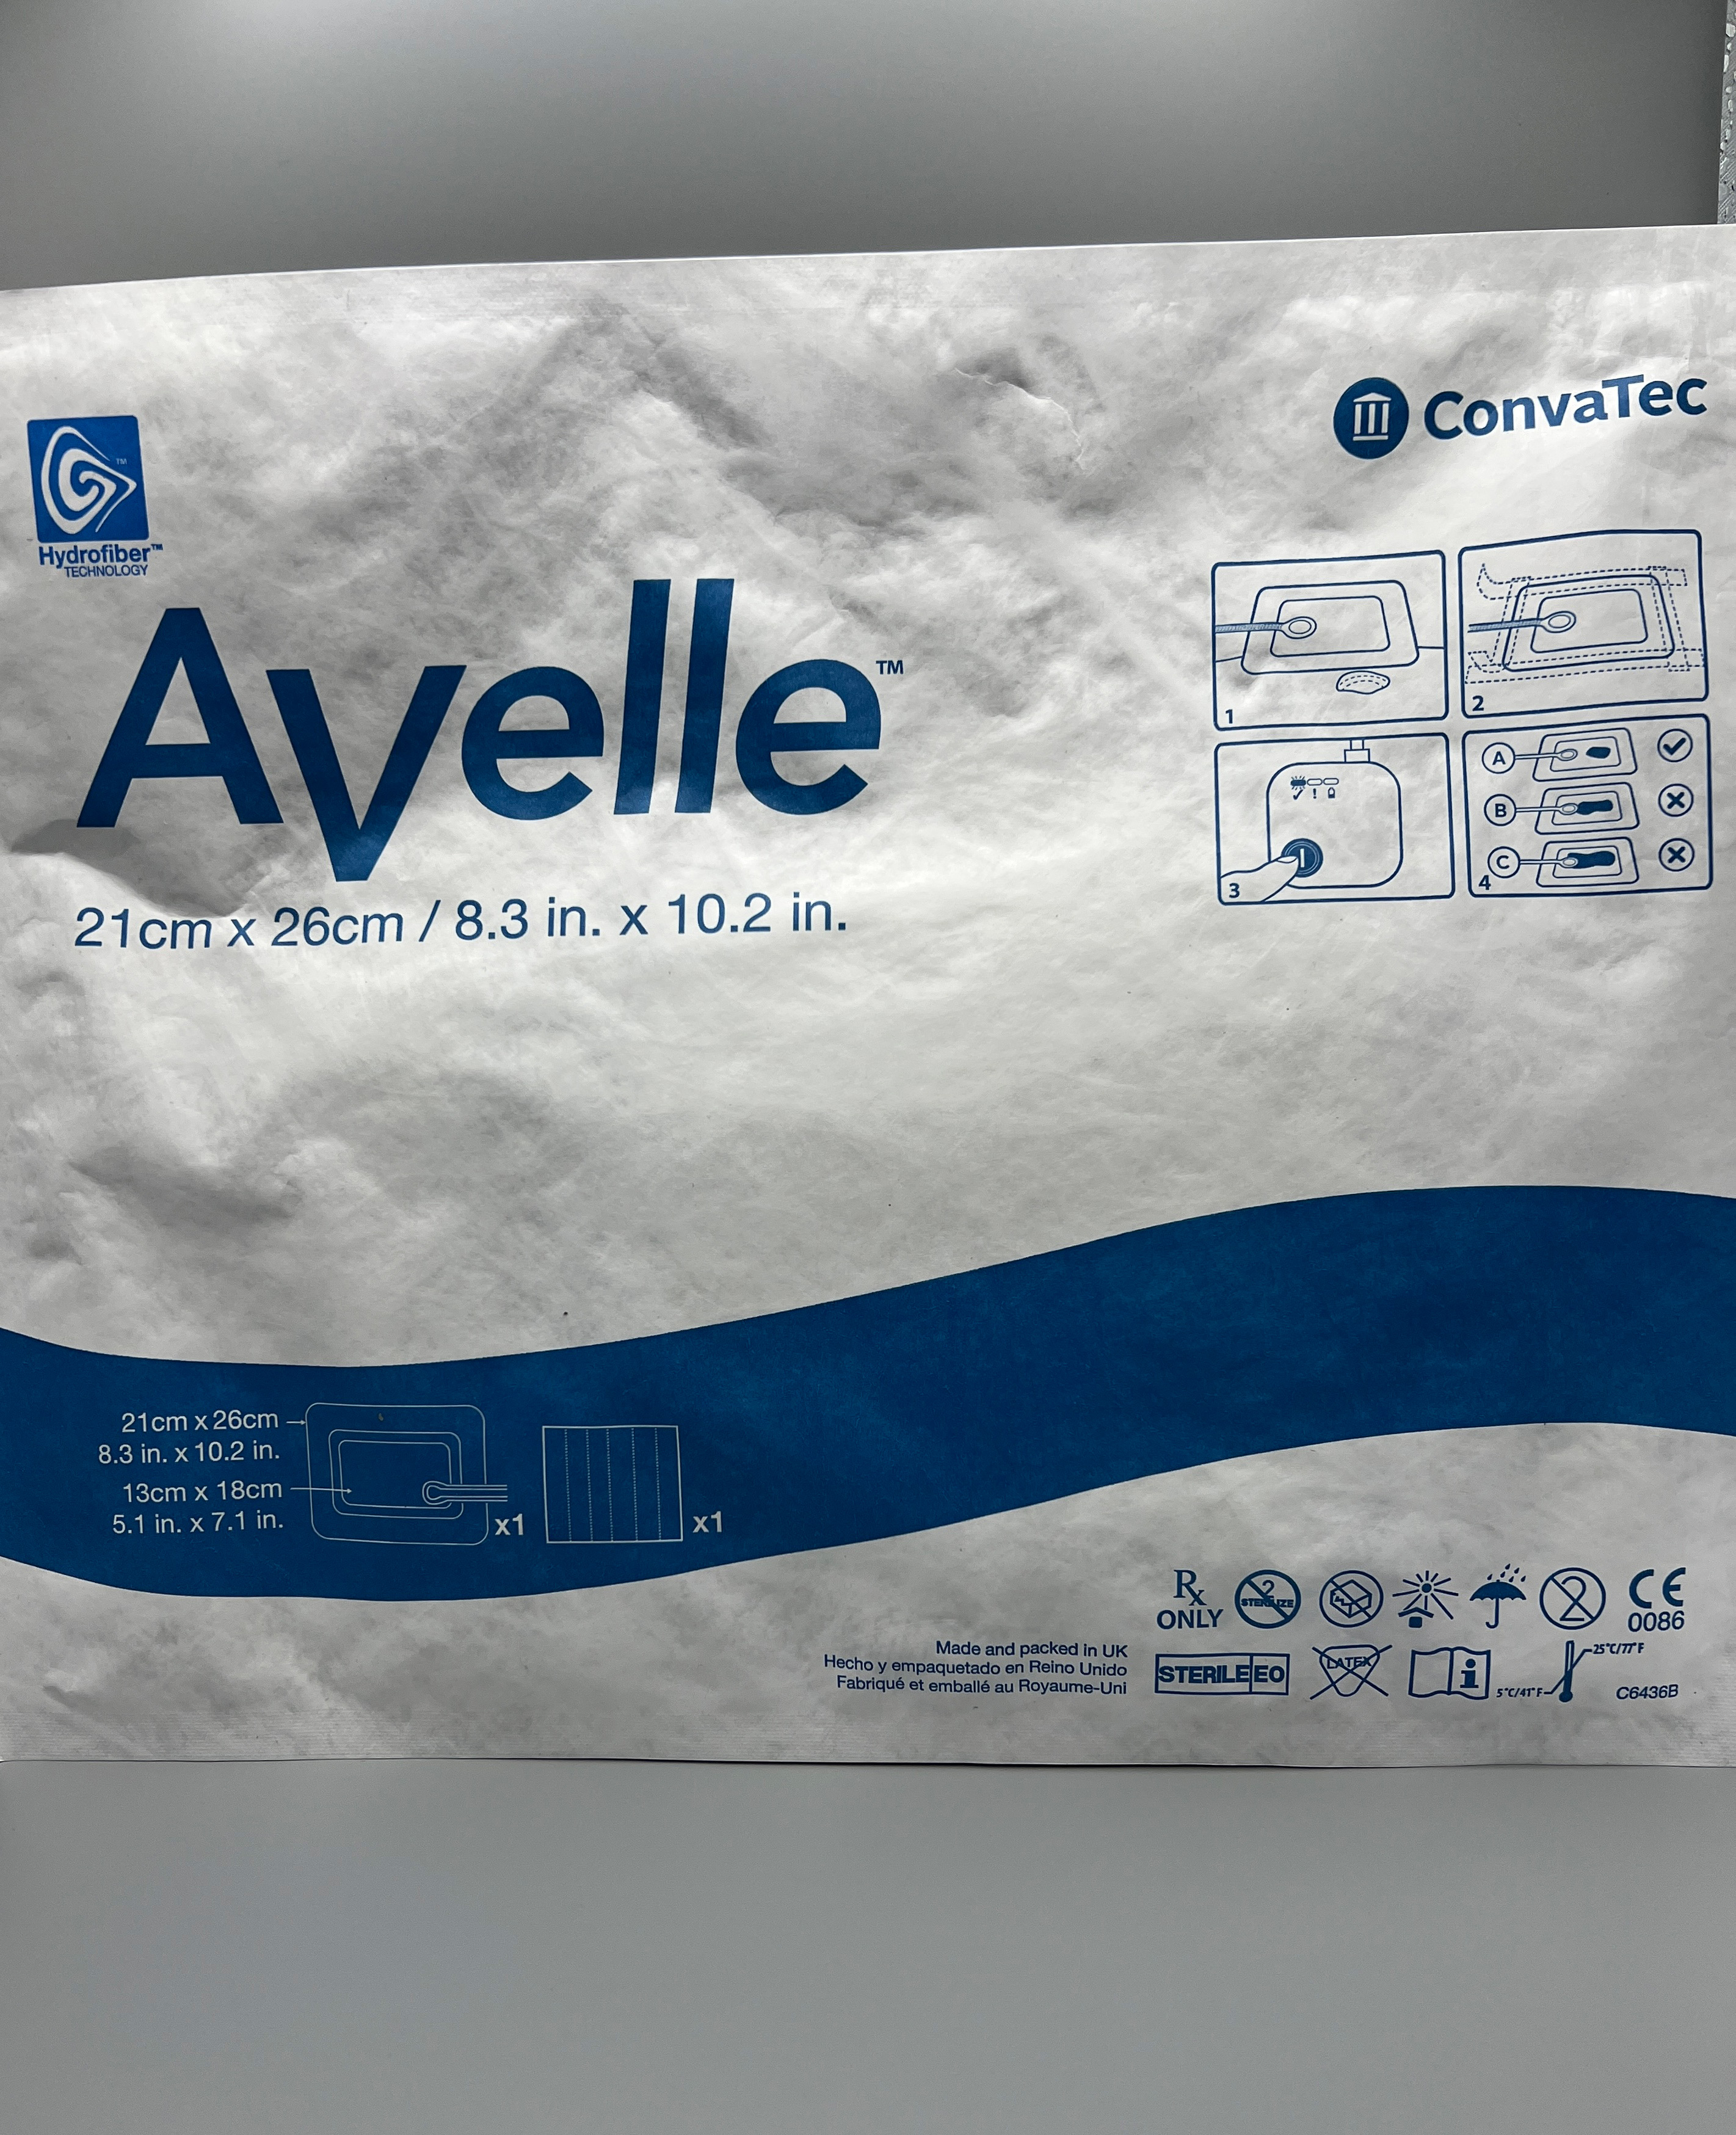 AVELLE NEGATIVE PRESSURE WOUND THERAPY DRESSING